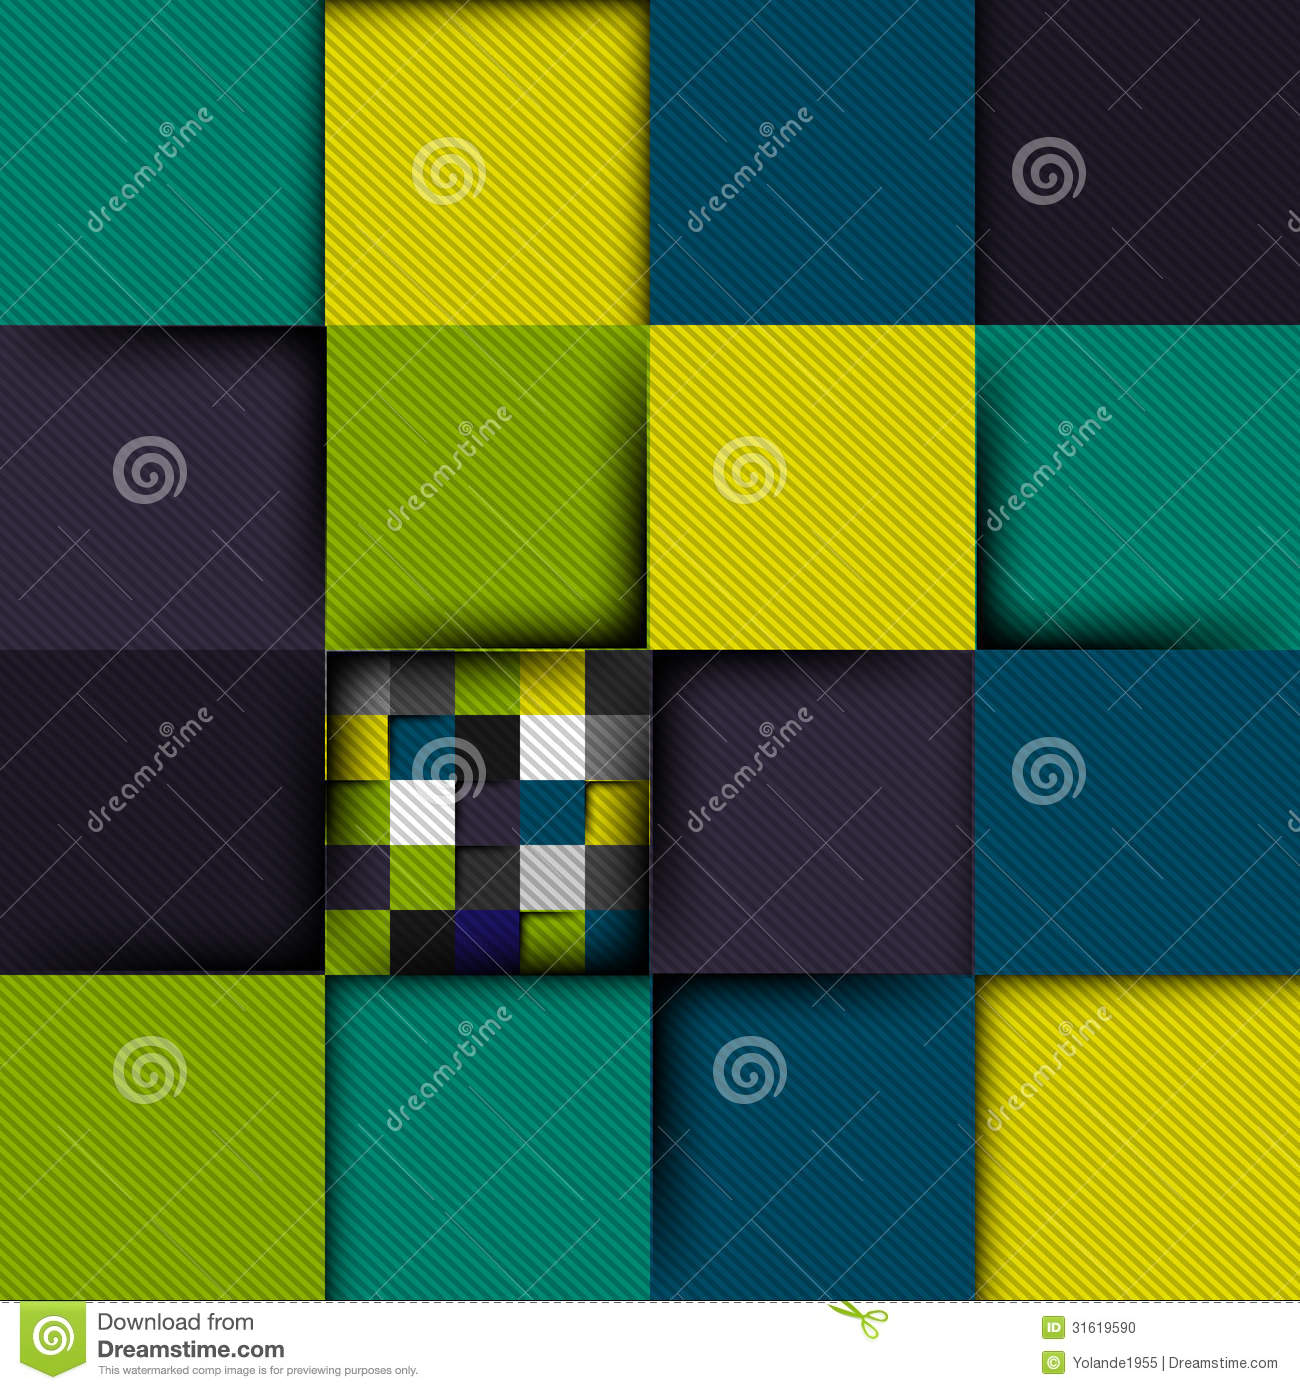 Graphic Design Backgrounds Patterns